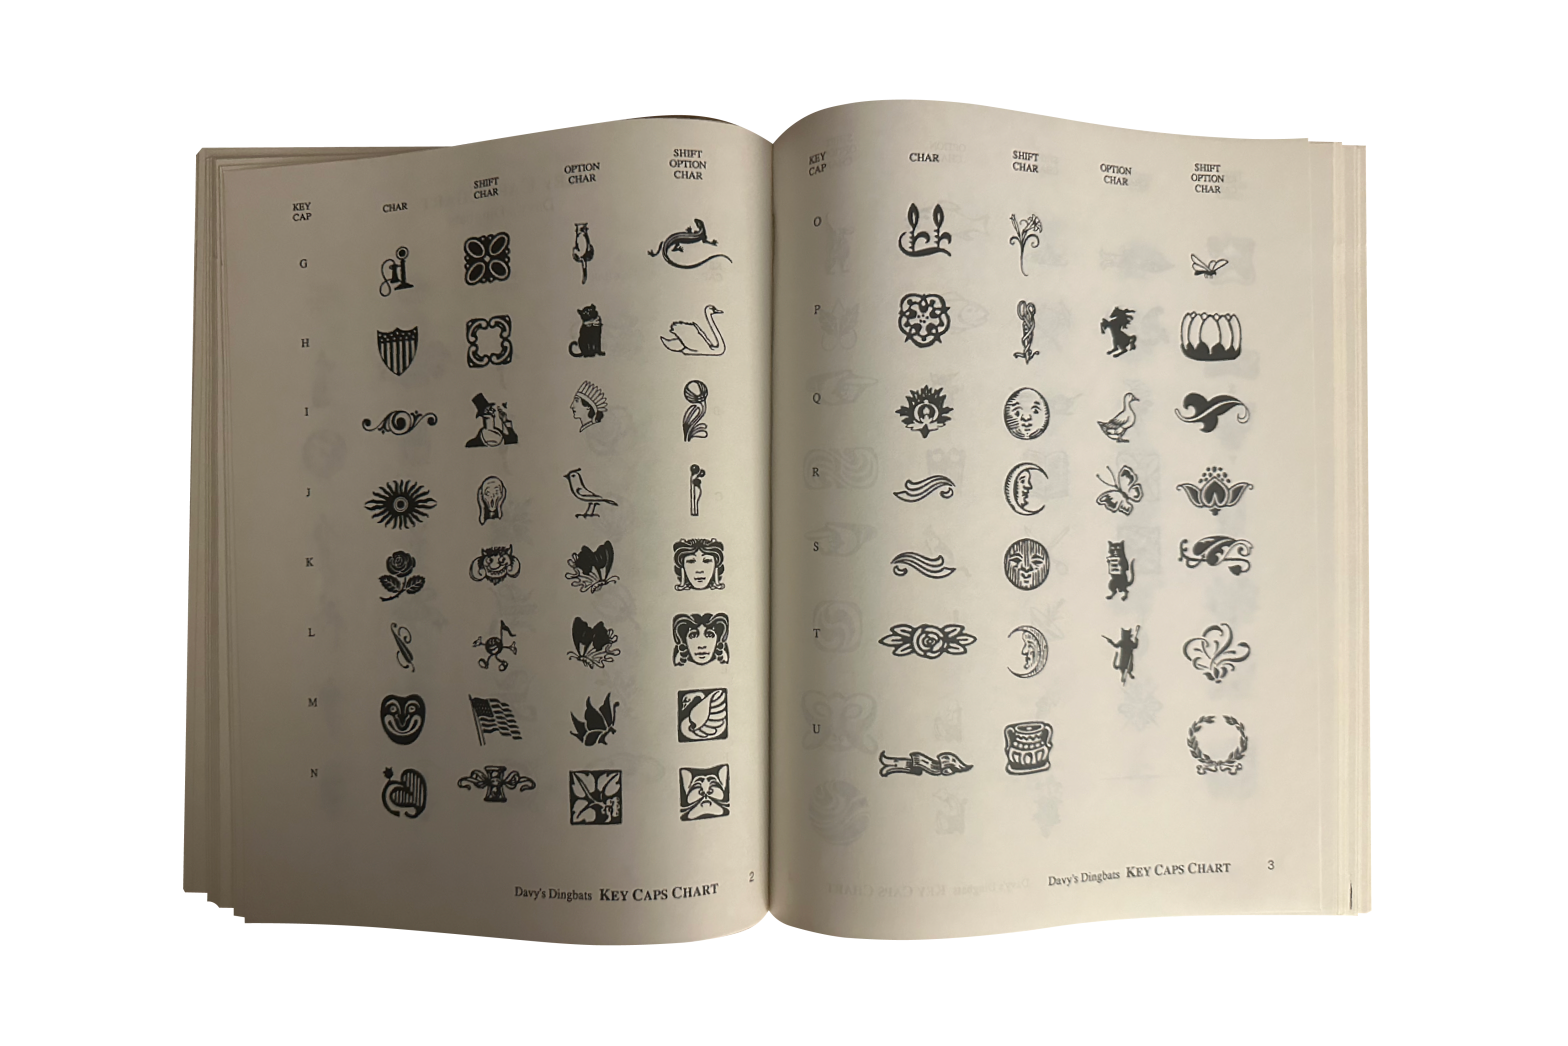 Interior spread of UB Big Caps, showing a grid of various black dingbat characters on white newsprint paper.